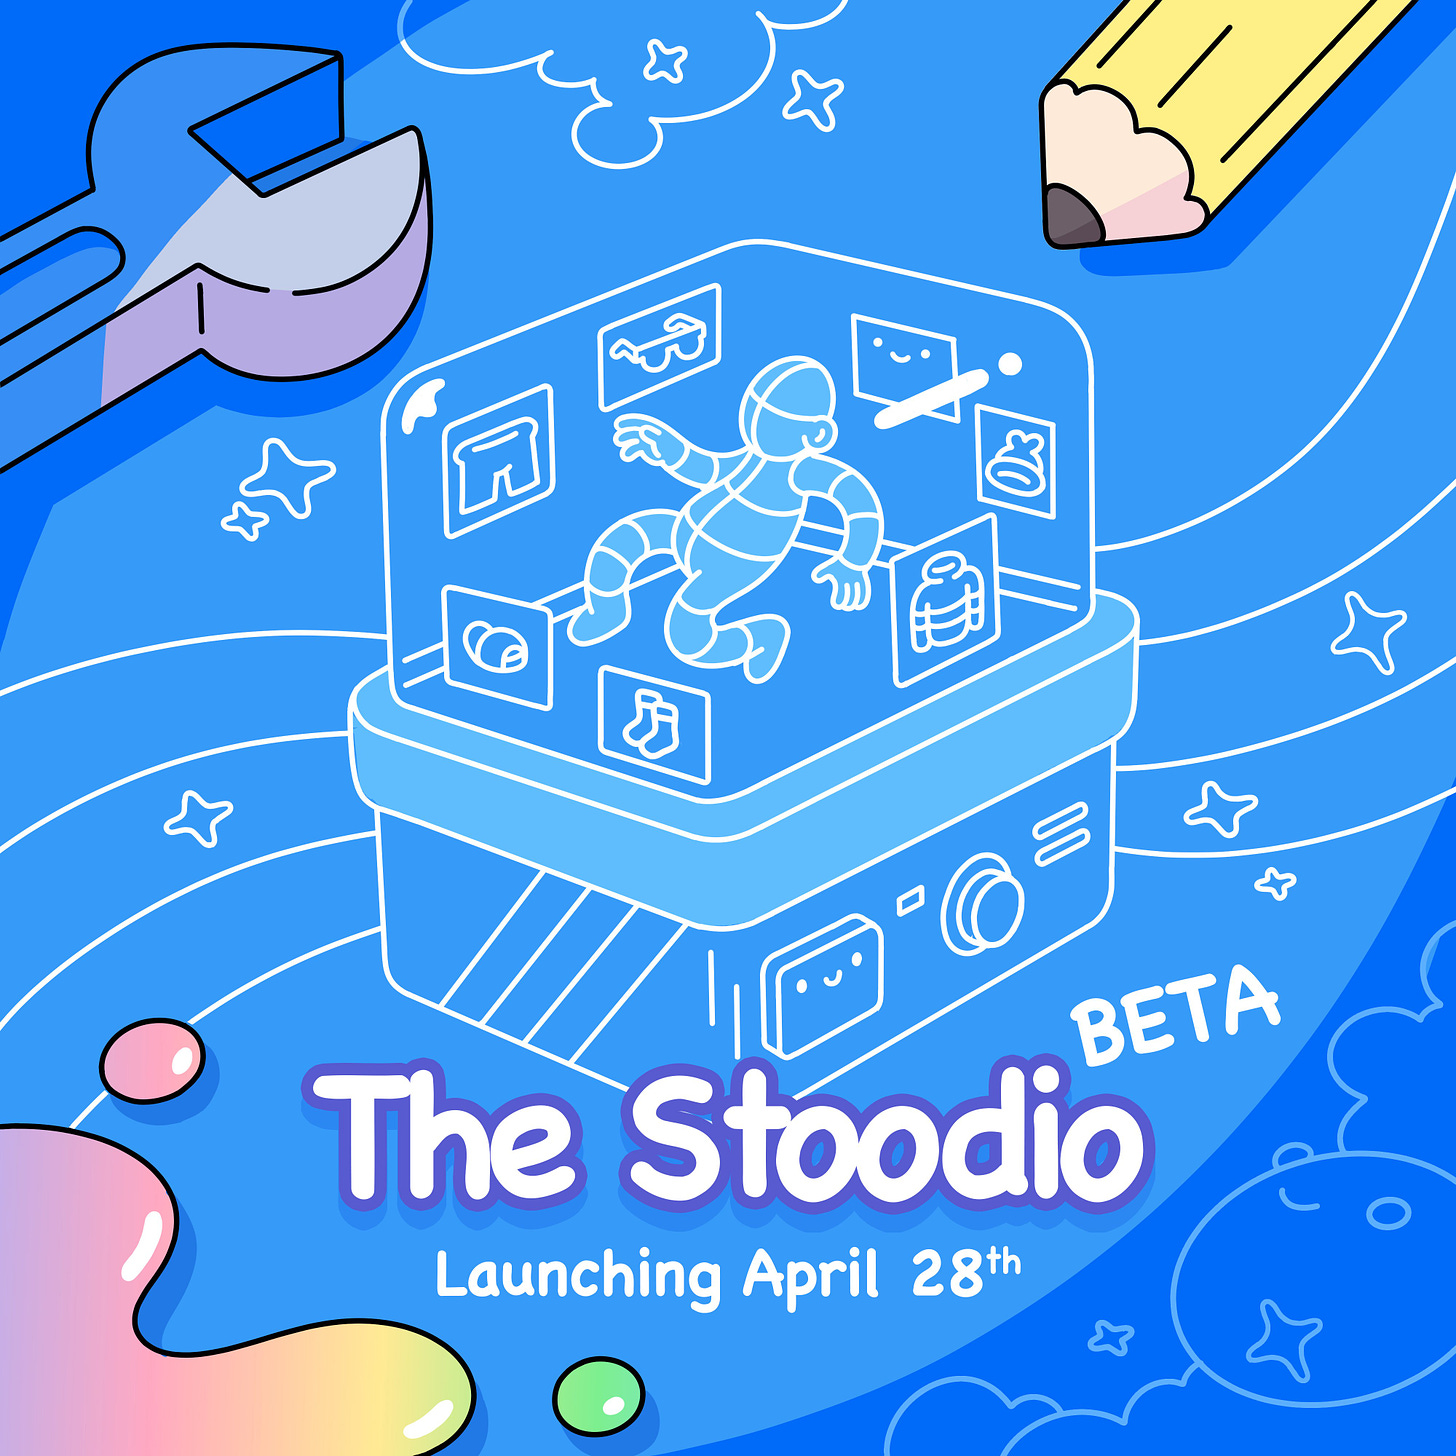 A zoomed in look at the Doodlemap, with a focus on The Stoodio, showing Wearables and a Doodle. Laying on the map is a pencil, wrench, and rainbow spill. 

The copy on the image reads The Stoodio: Beta. Launching April 28th.